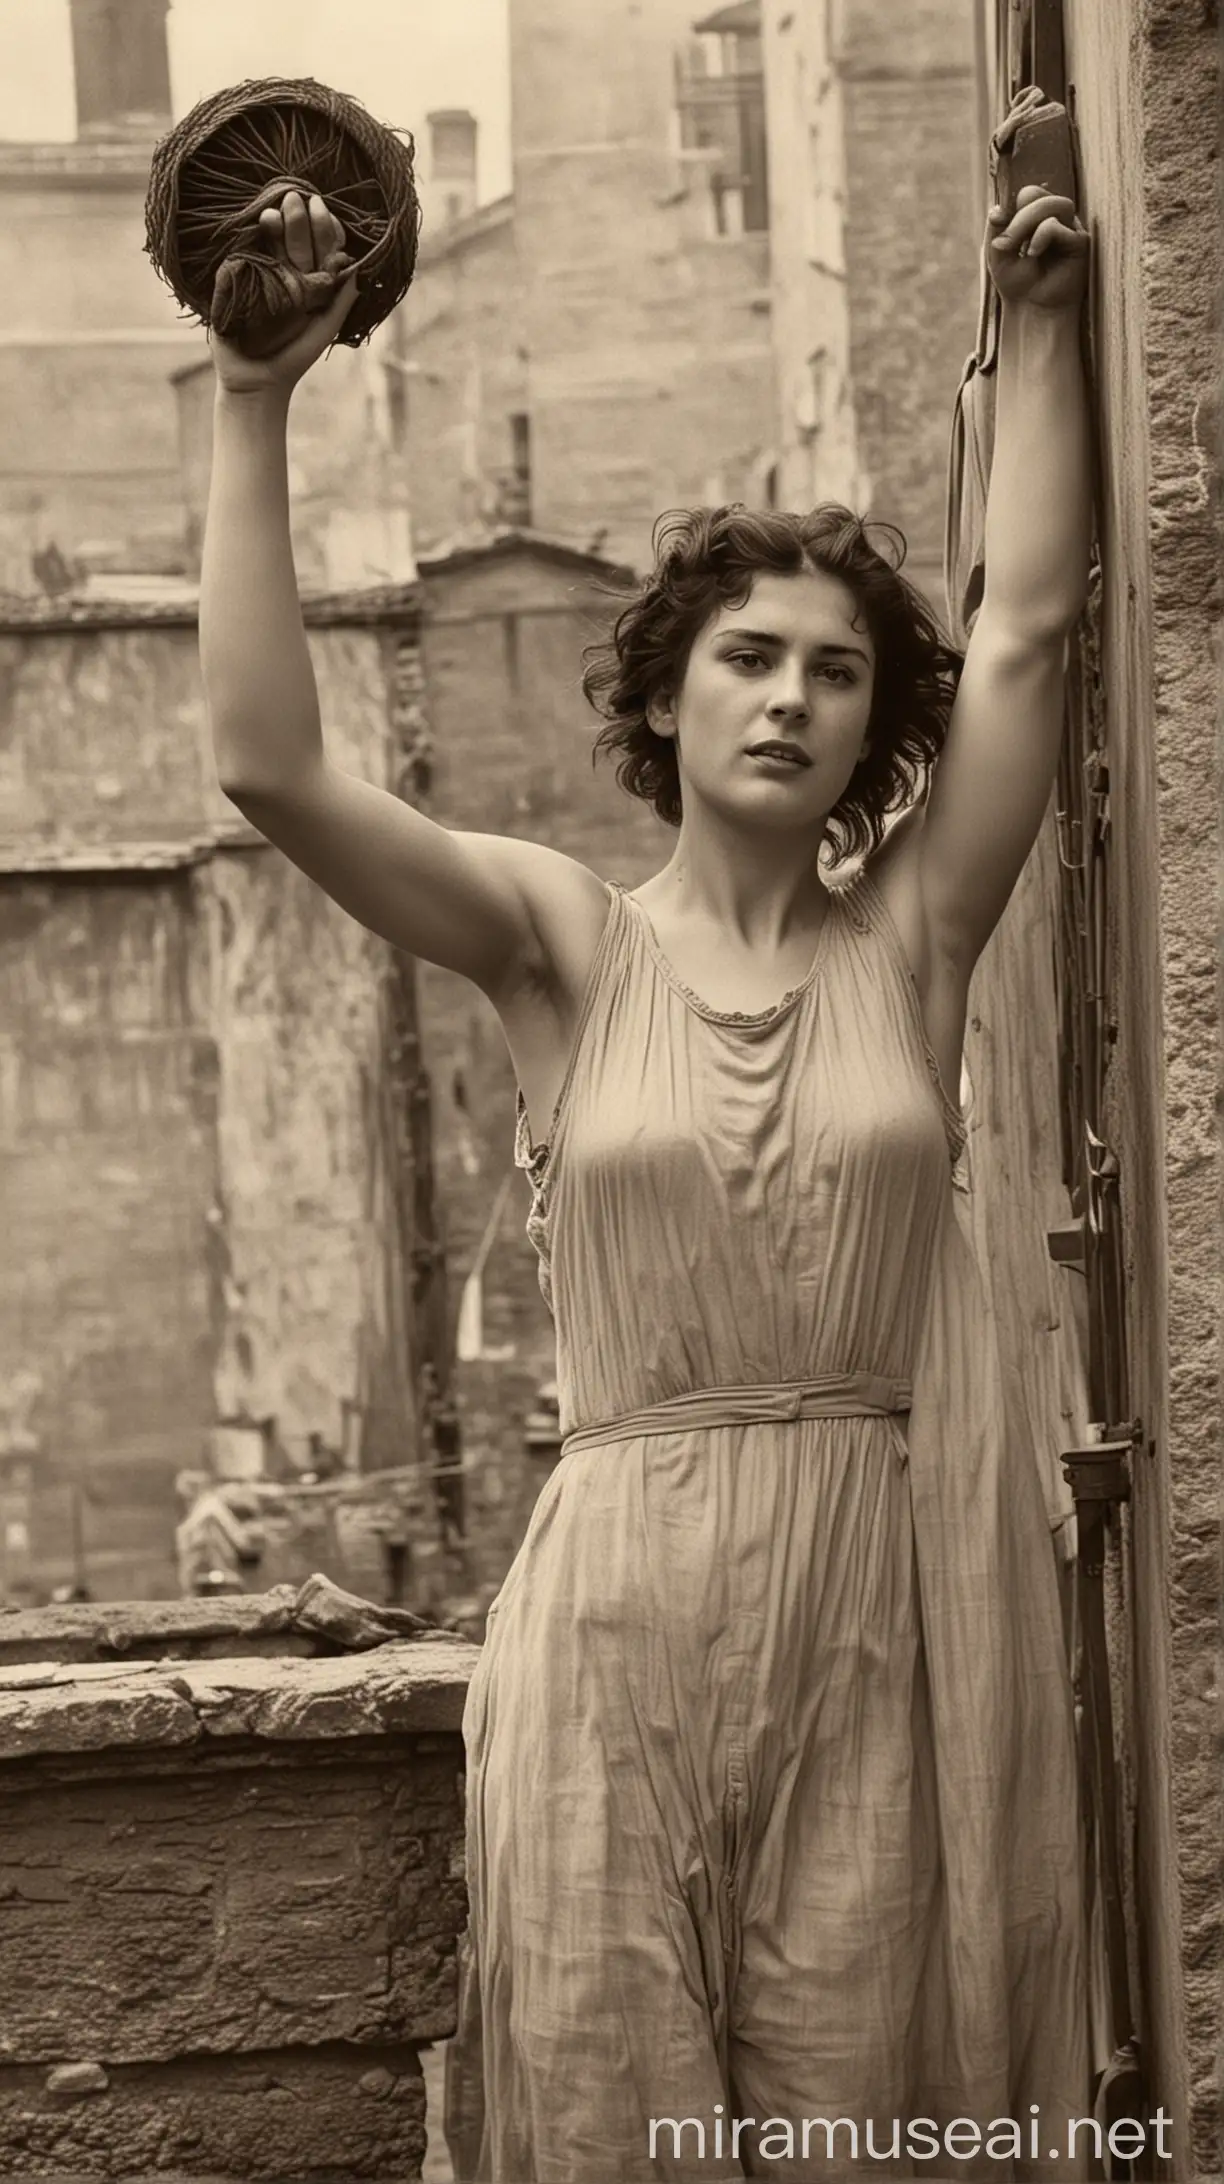 in 1920 a woman in Rome doing her chore, heavy hairy armpits hair, unshaved underarms